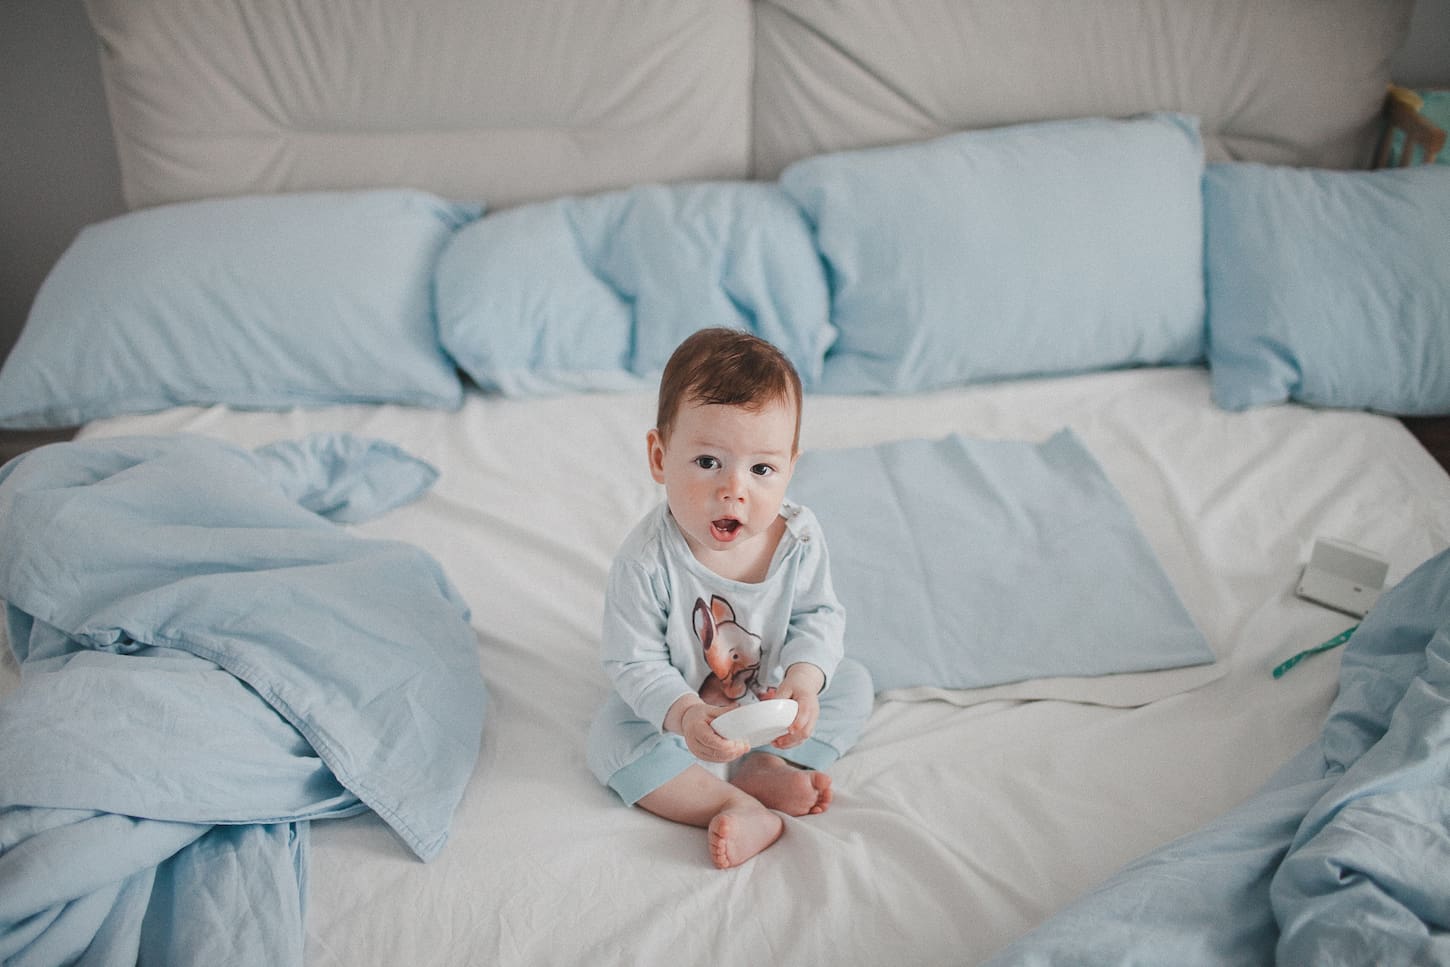 An image of a baby boy sitting in the bed.